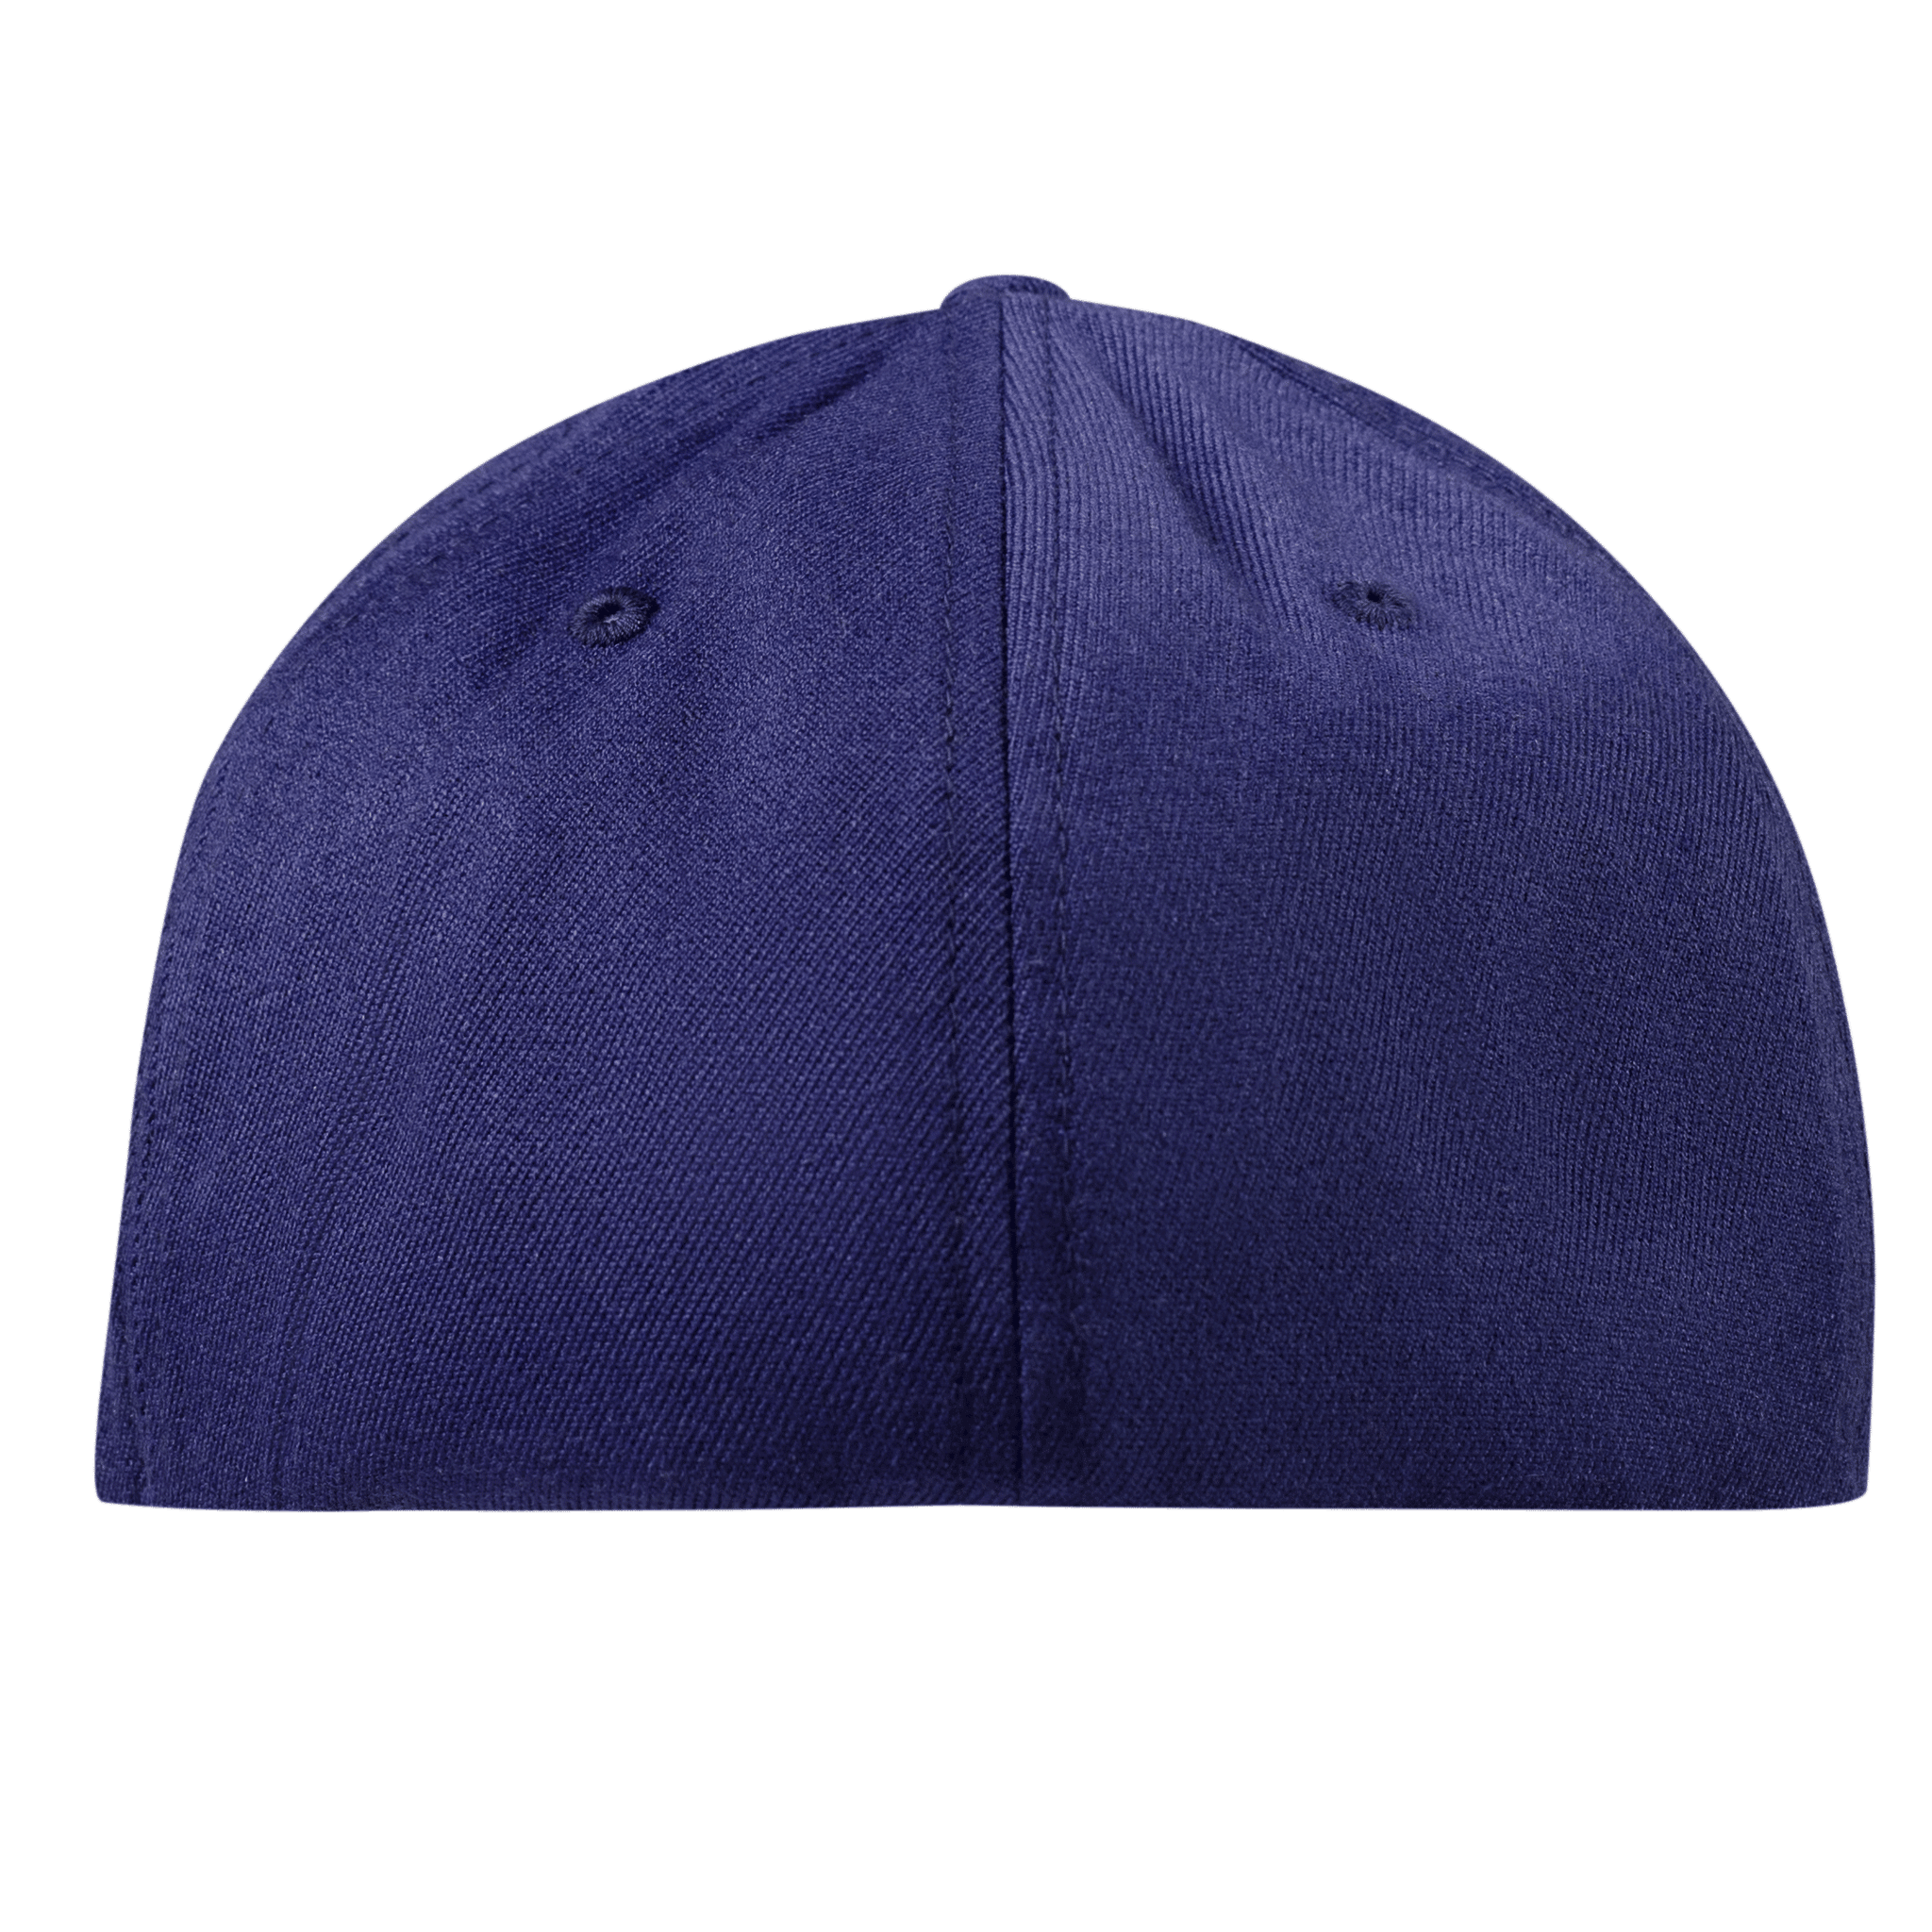 New Mexico 47 Flexfit Fitted Back Navy